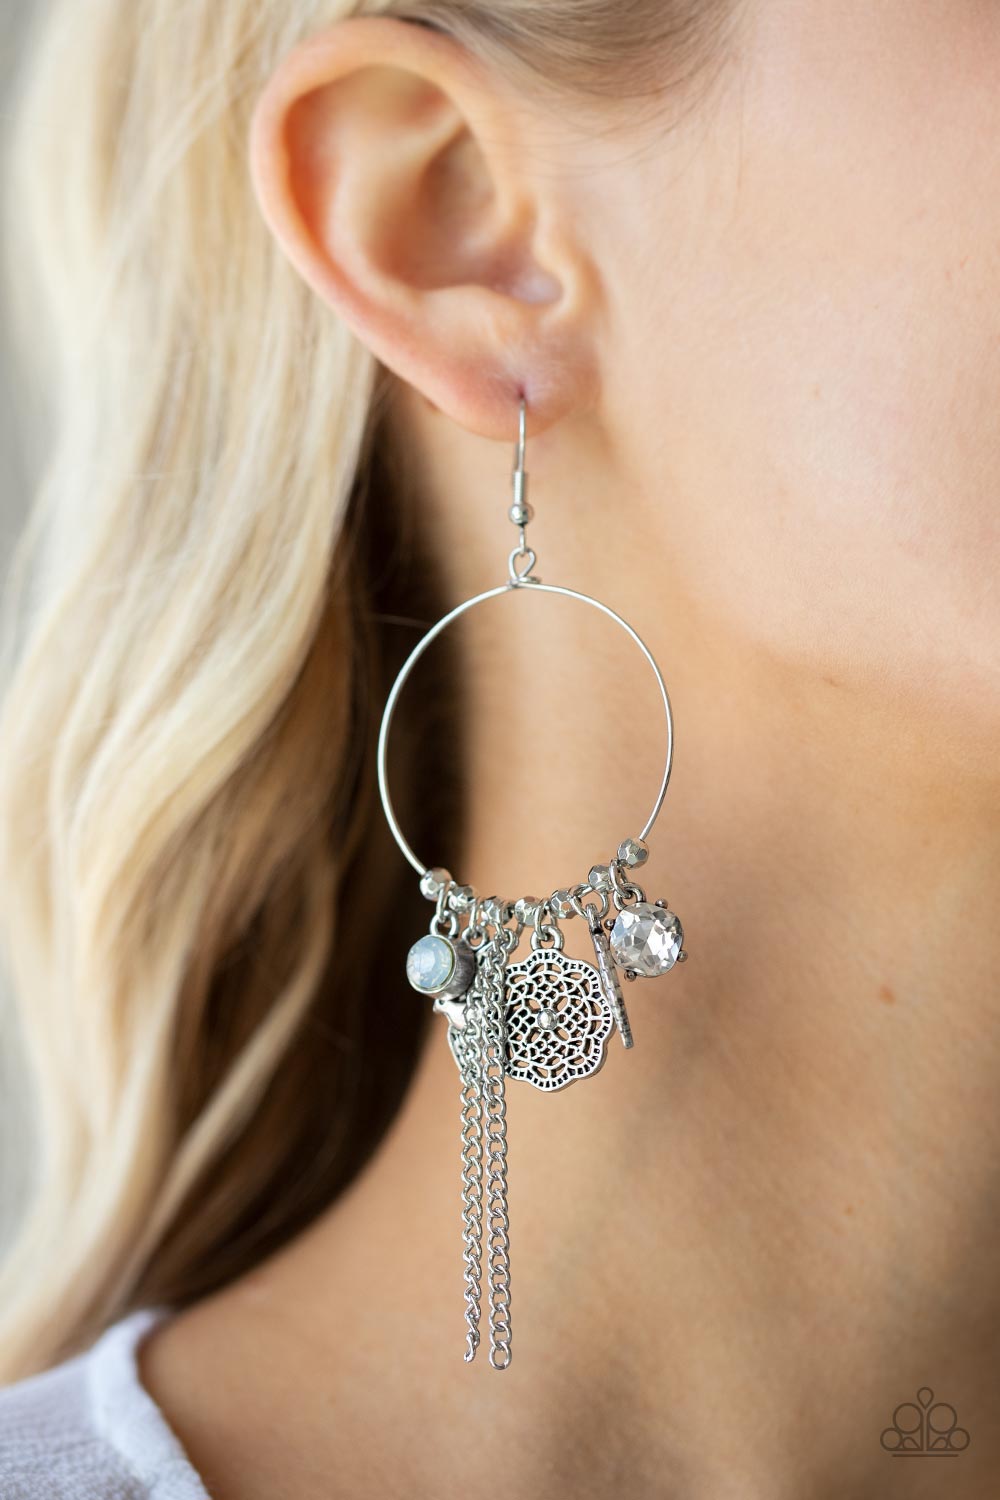 TWEET Dreams White Earring - Paparazzi Accessories  Free-spirited charms, including opal and white gems, a floral medallion, a bird in flight, and a fluttering feather, dangle from a dainty silver ring coalescing into a charming lure. Earring attaches to a standard fishhook fitting.  All Paparazzi Accessories are lead free and nickel free!  Sold as one pair of earrings.